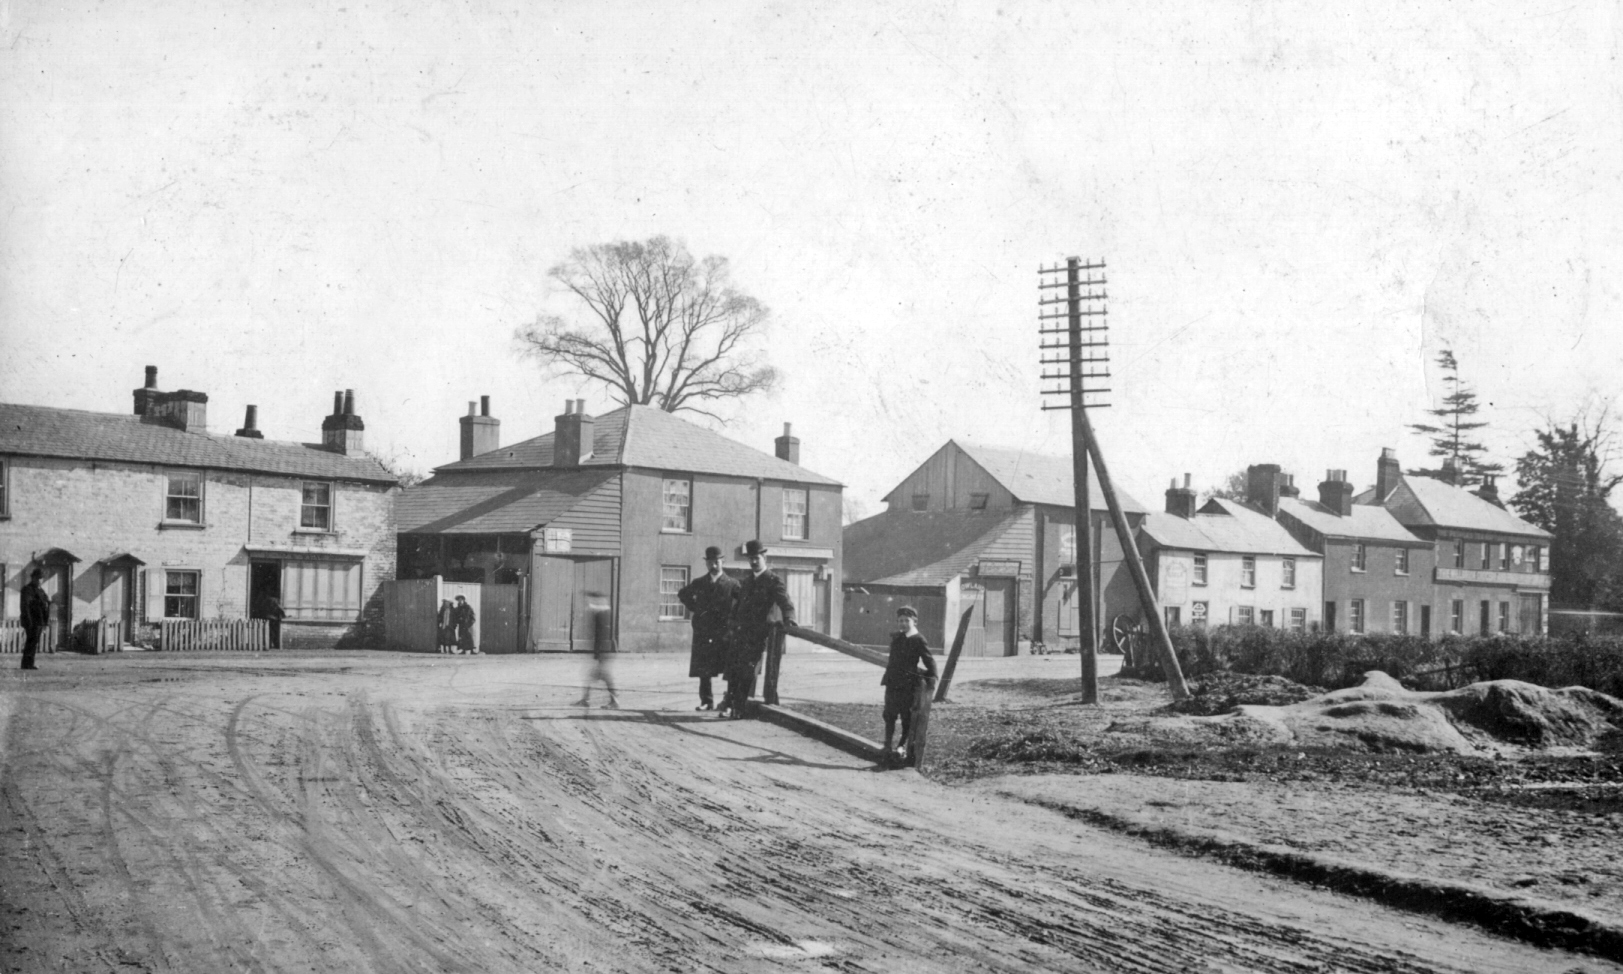 Millbrook in the early 1900s.